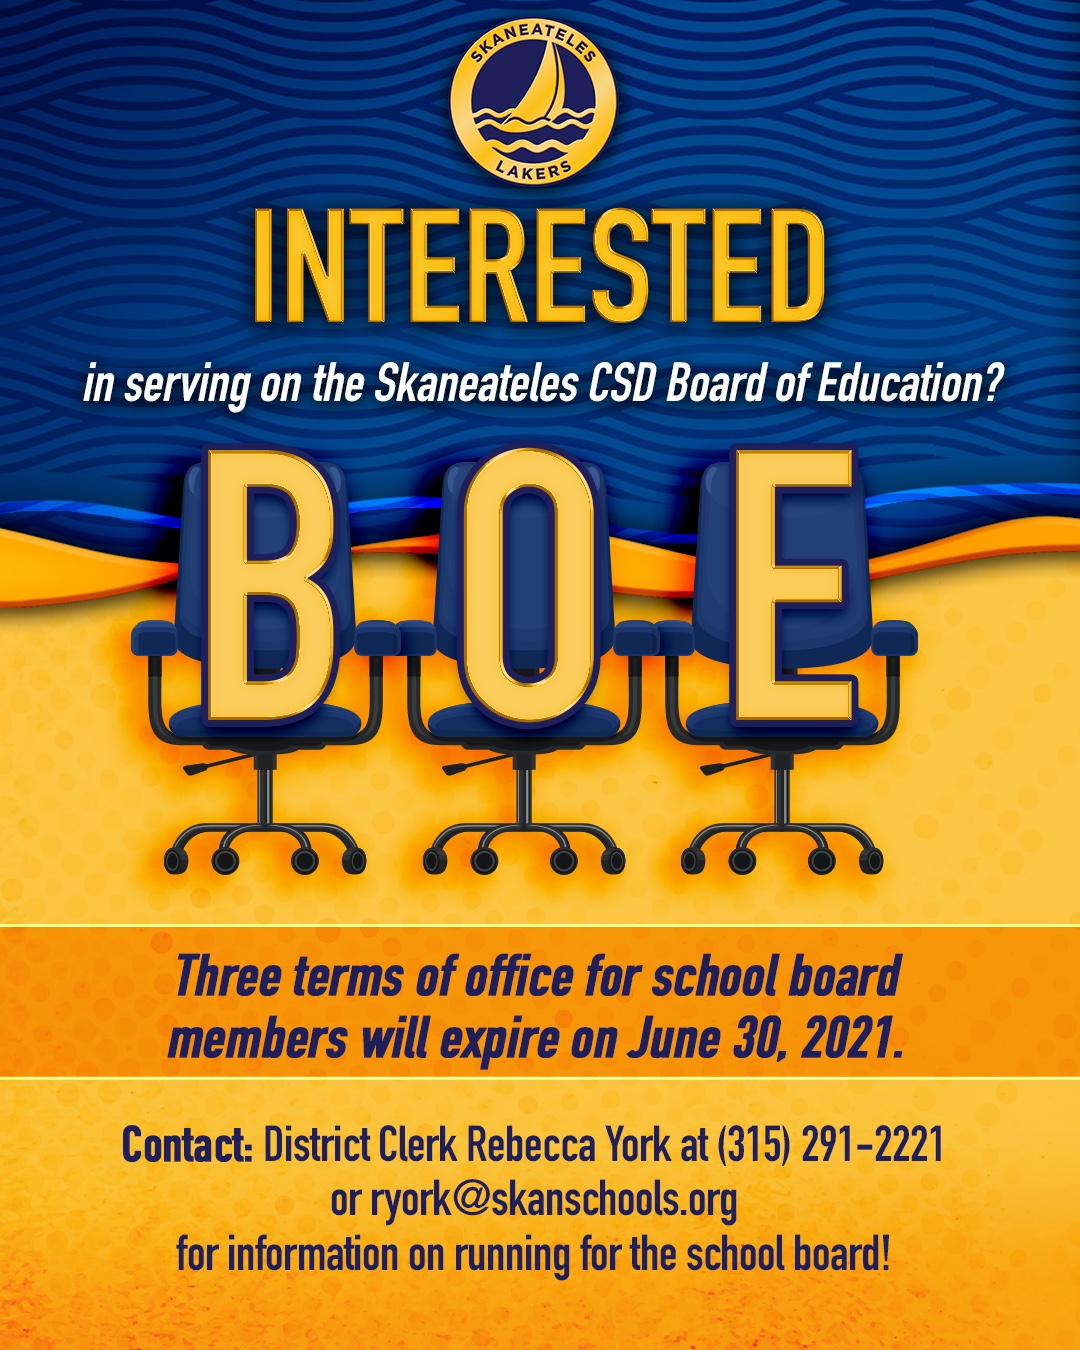 Interested in serving on the Skaneateles CSD BOE? Contact District Clerk Rebecca York at 315-291-2221 or ryork@skanschools.org for more information